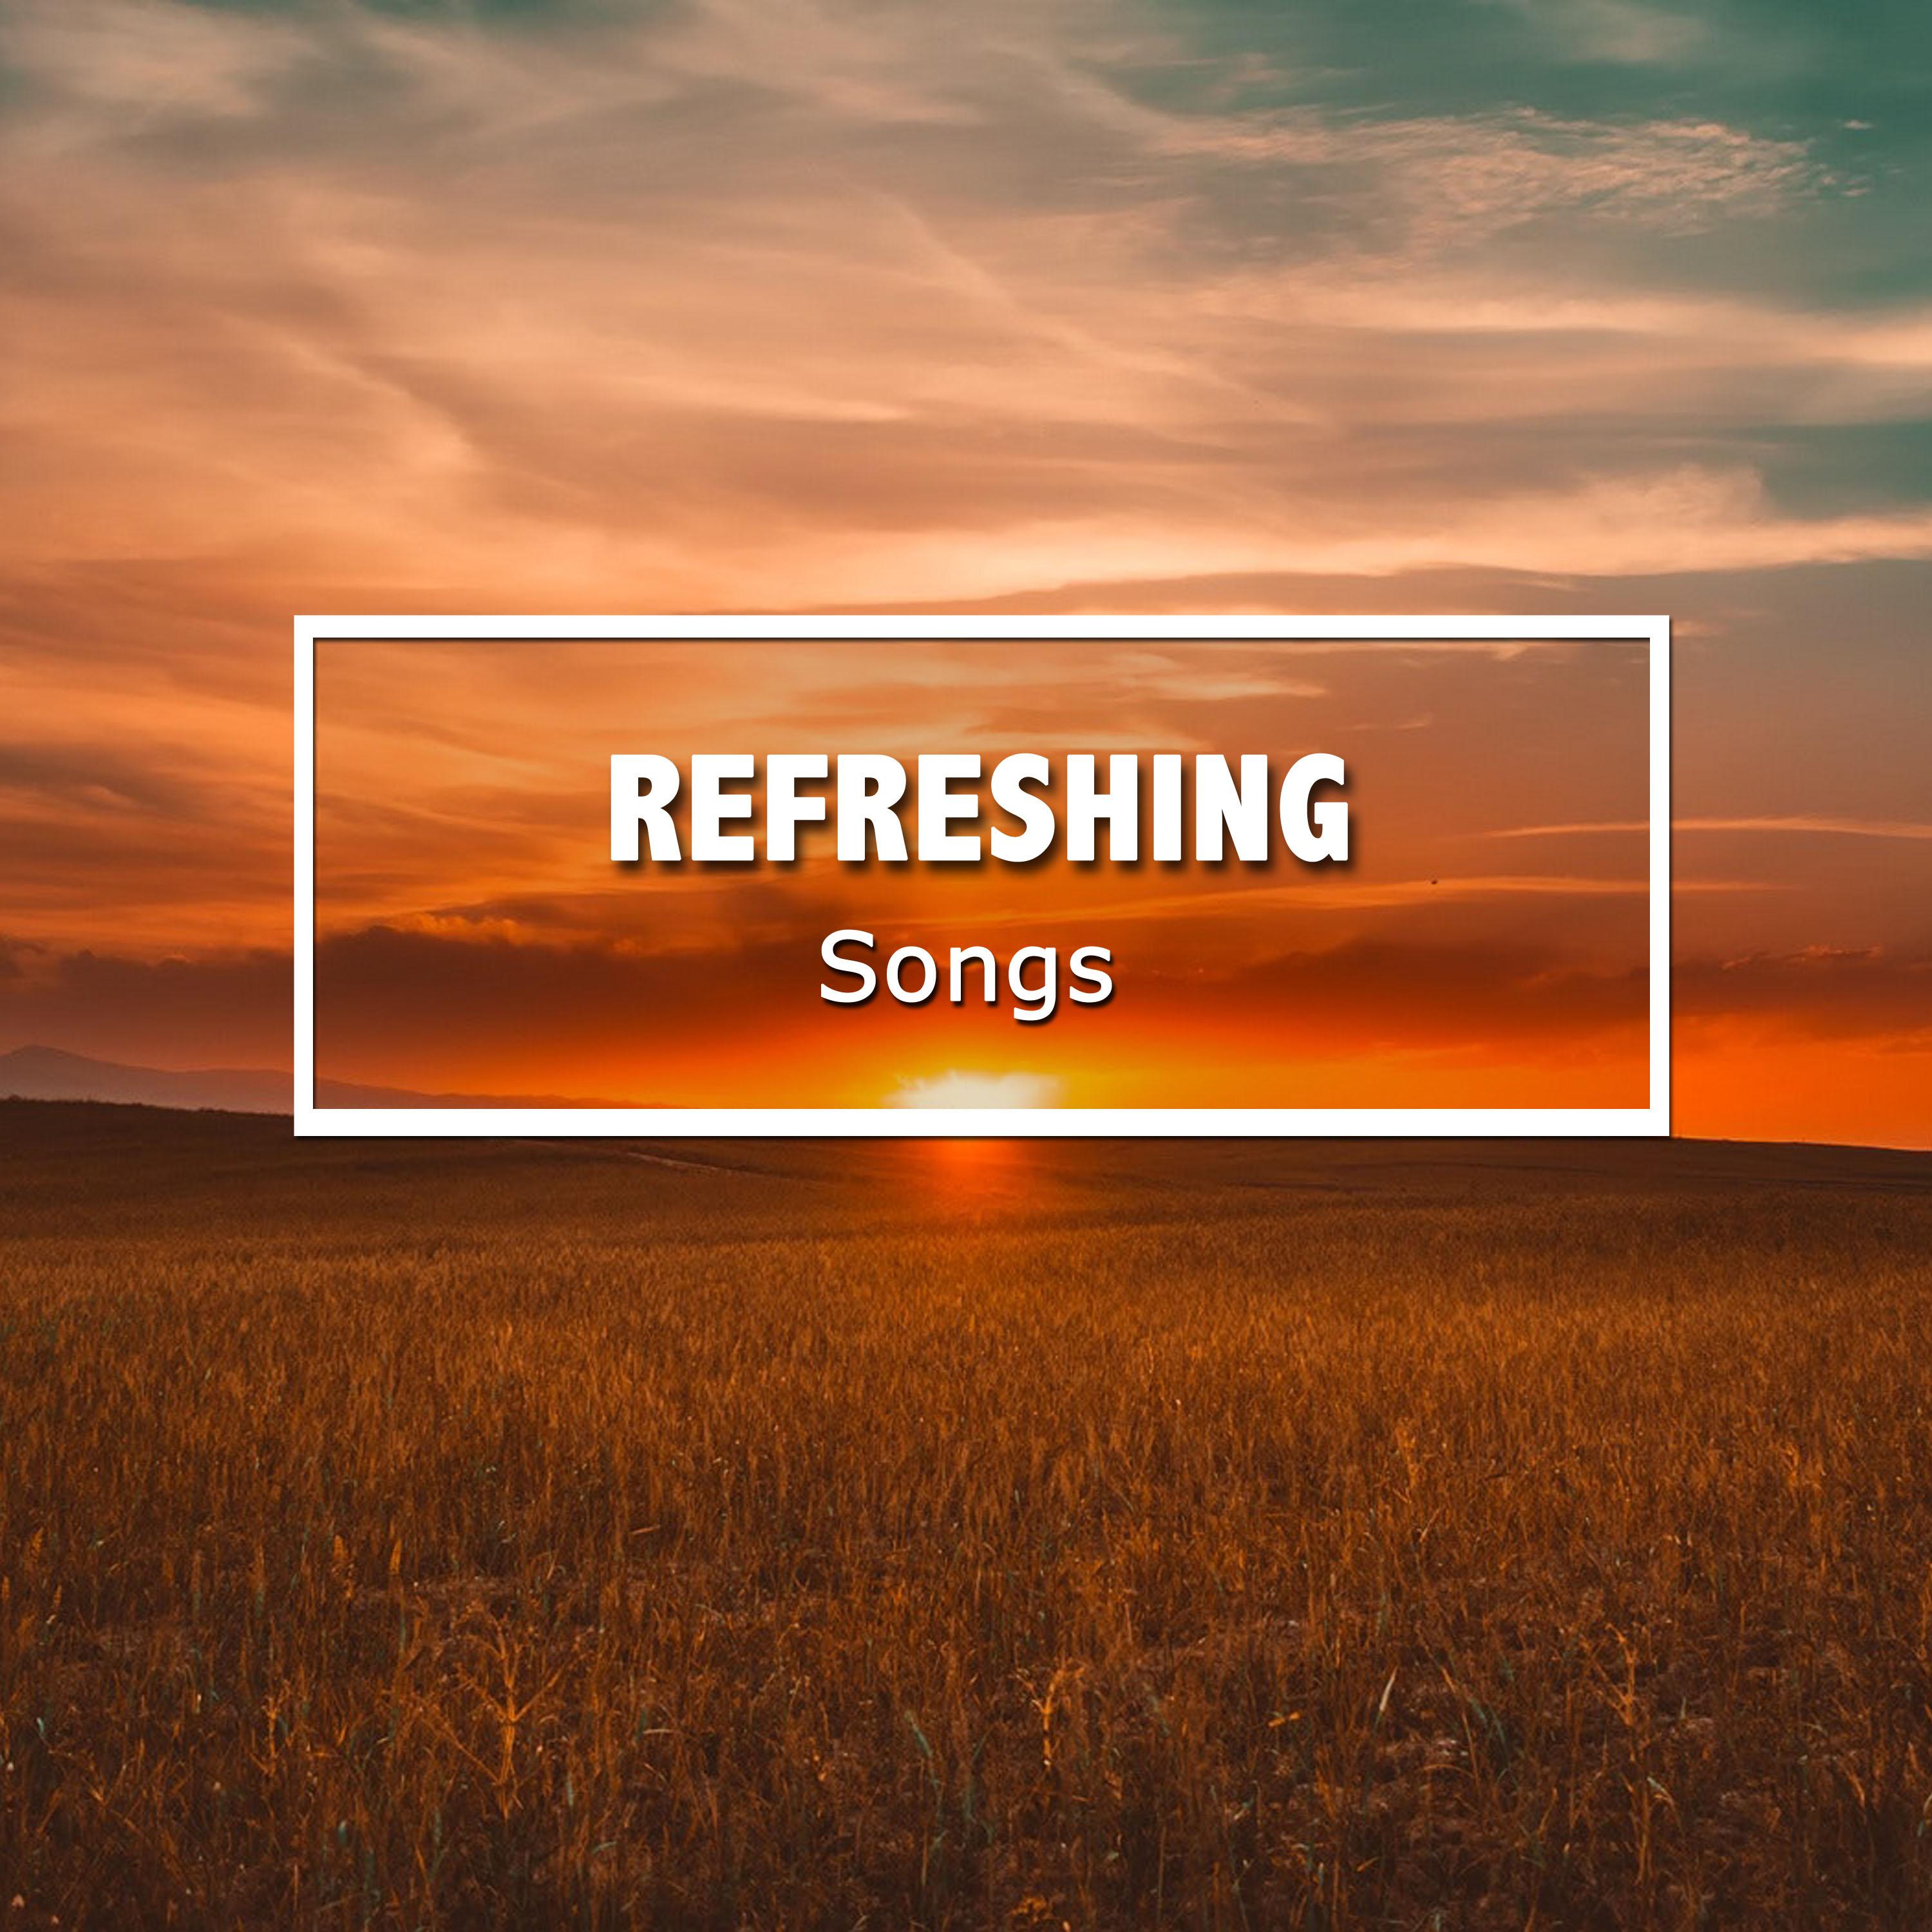 #15 Refreshing Songs forReiki or a Yoga Workout